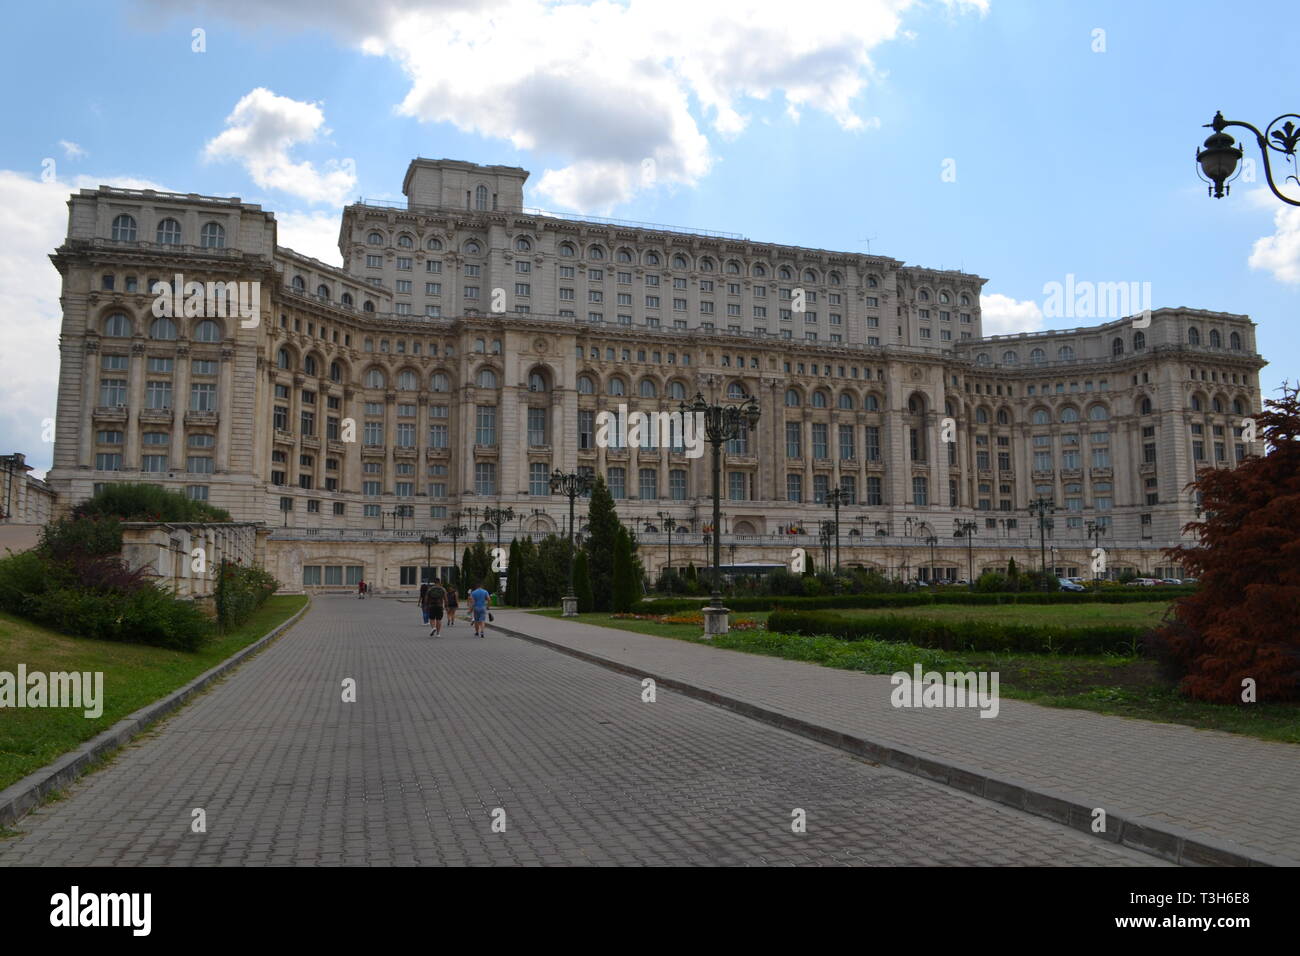 Palace of Parliament, created by Nicolae Ceausescu, Bucharest, Romania. Has 3000 rooms and covers 330'000 sq metres. Stock Photo